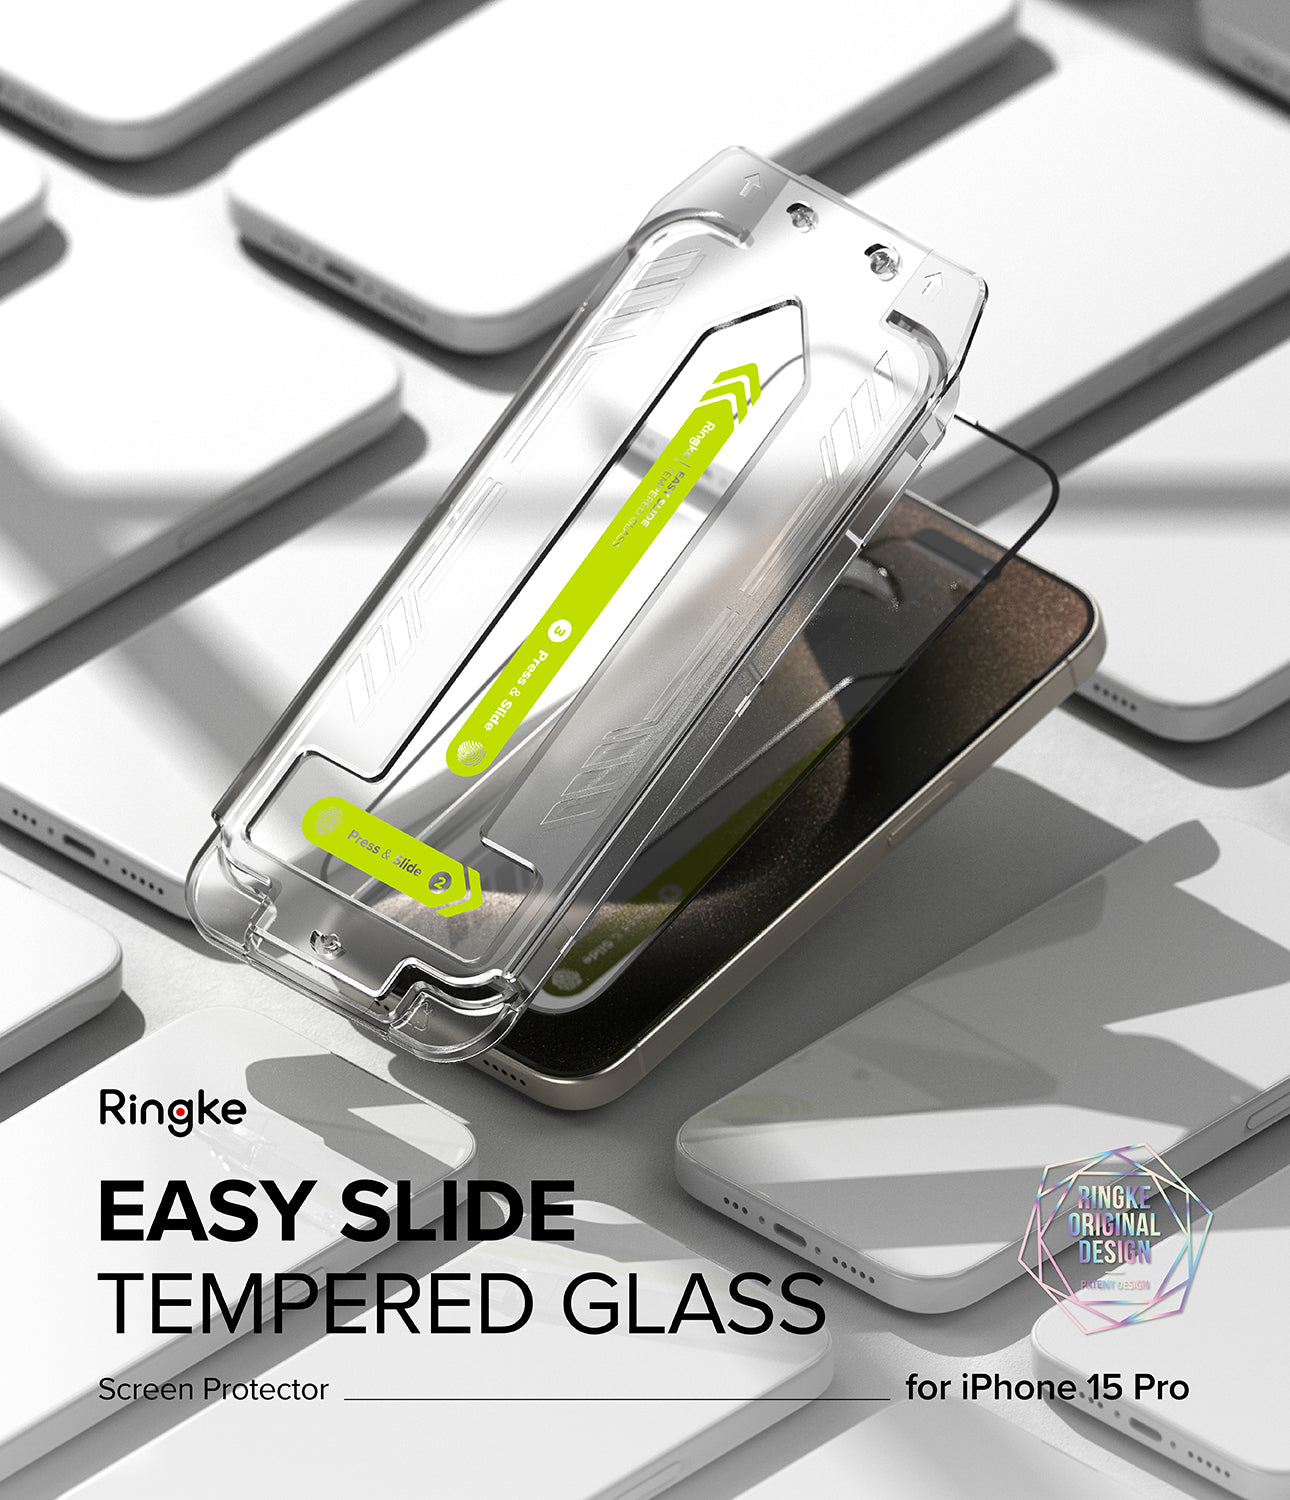 iPhone 15 Pro Screen Protector | Easy Slide Tempered Glass - By Ringke